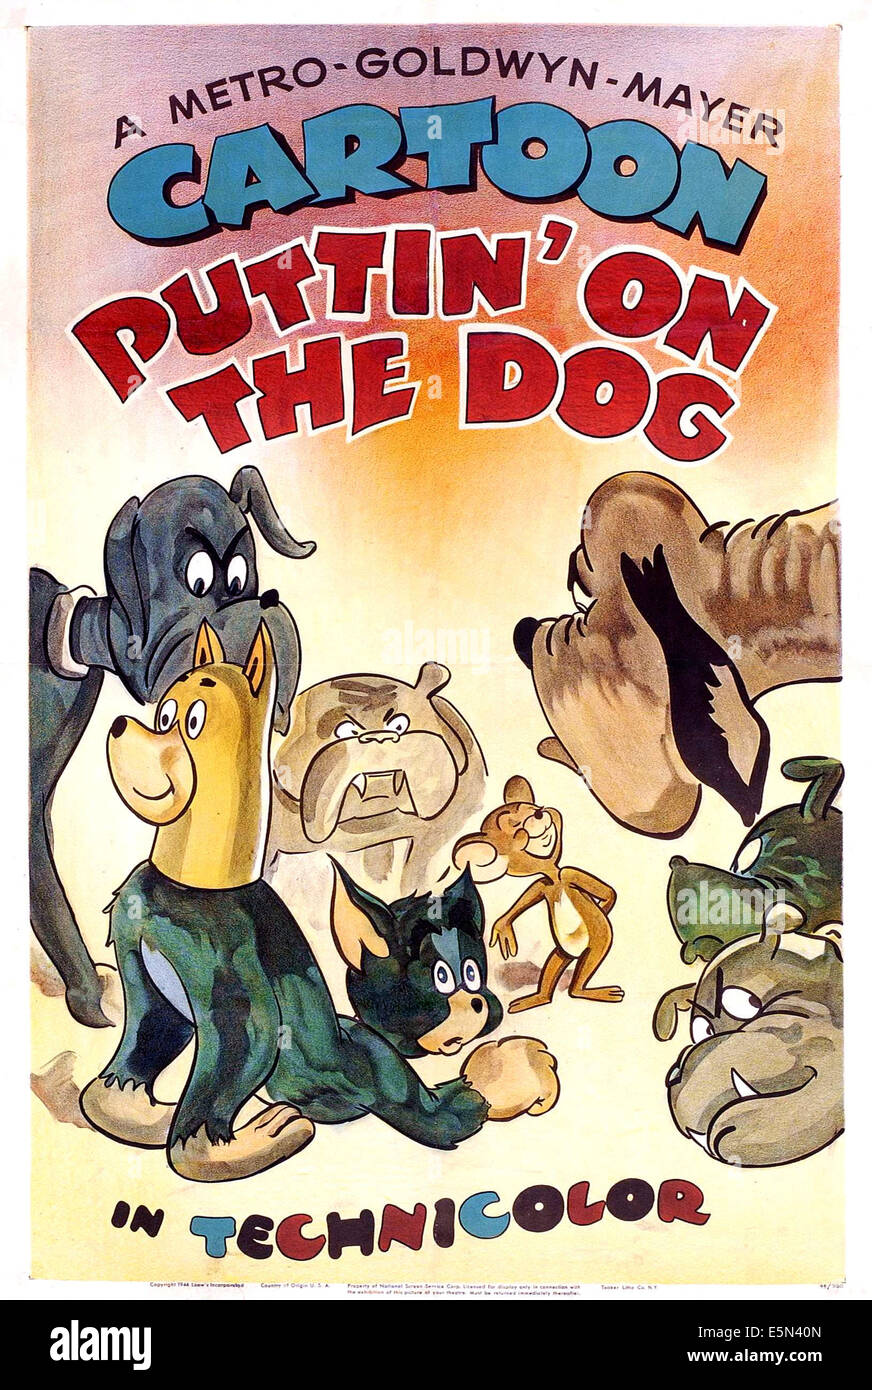 PUTTIN' ON THE DOG, center from left: Tom, Jerry, 1944. Stock Photo